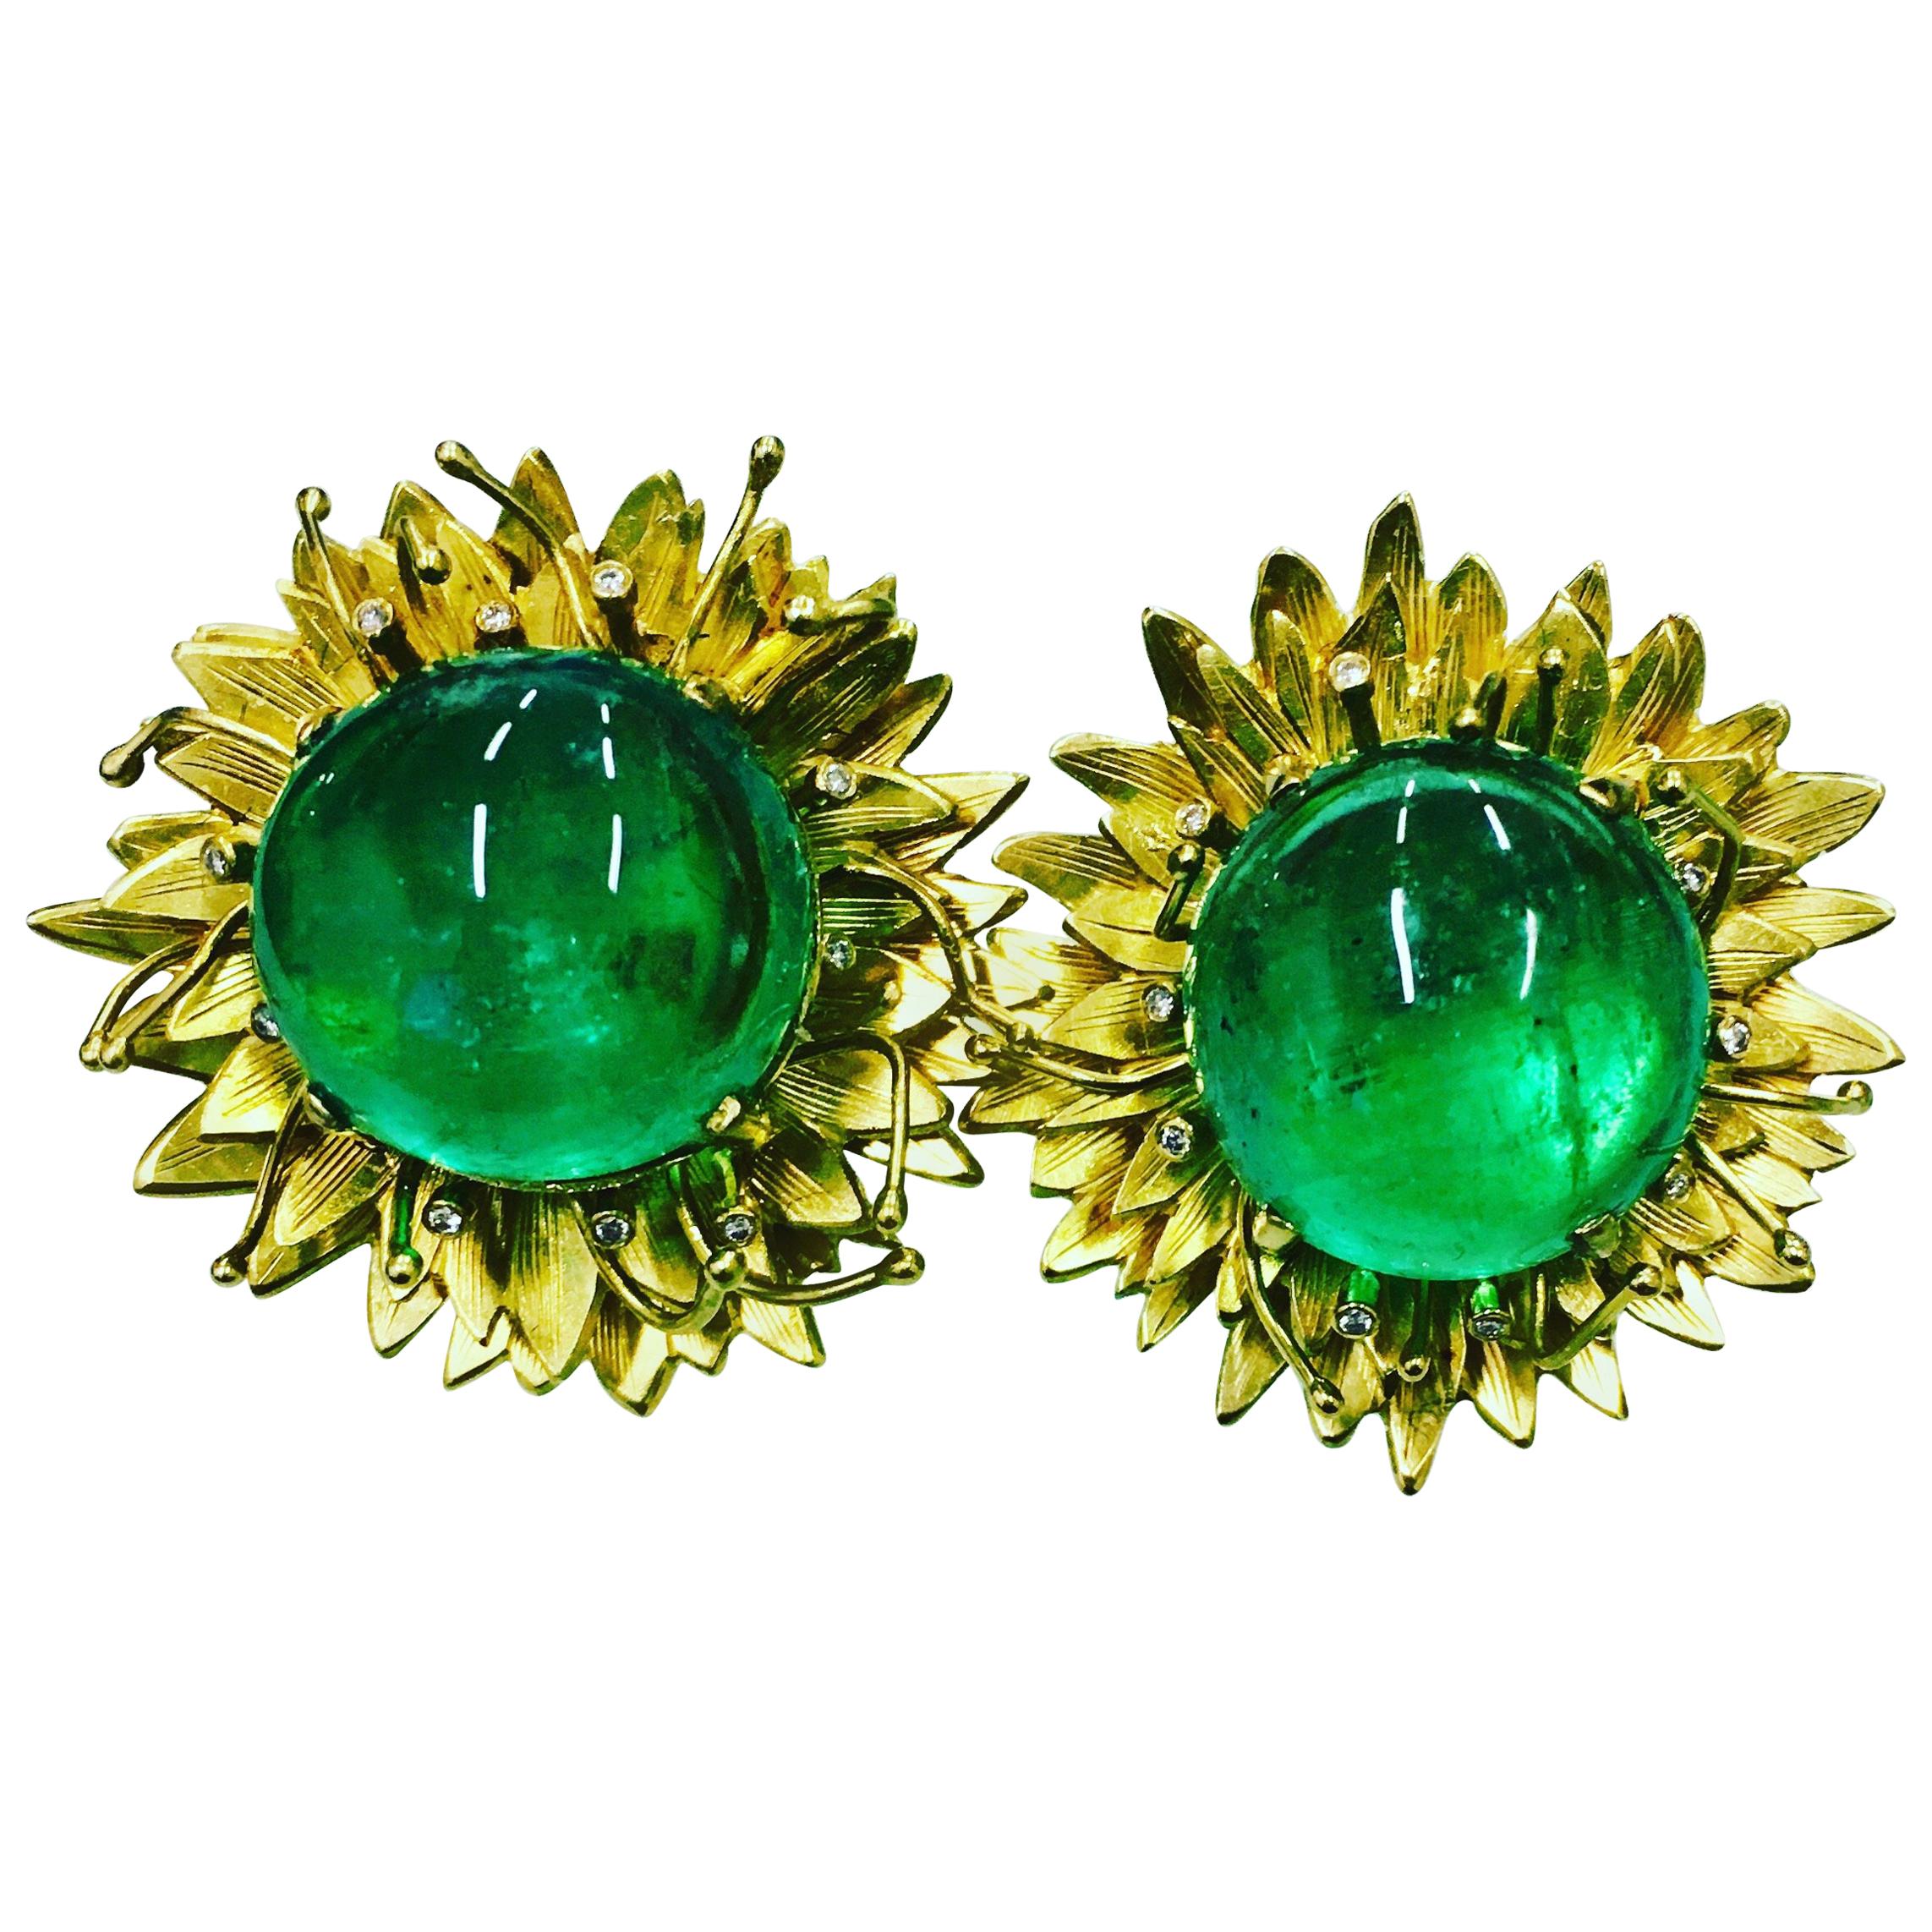  18 Carat Yellow Gold Colombian 10 Carat Cabochon and Diamond Flower Earrings